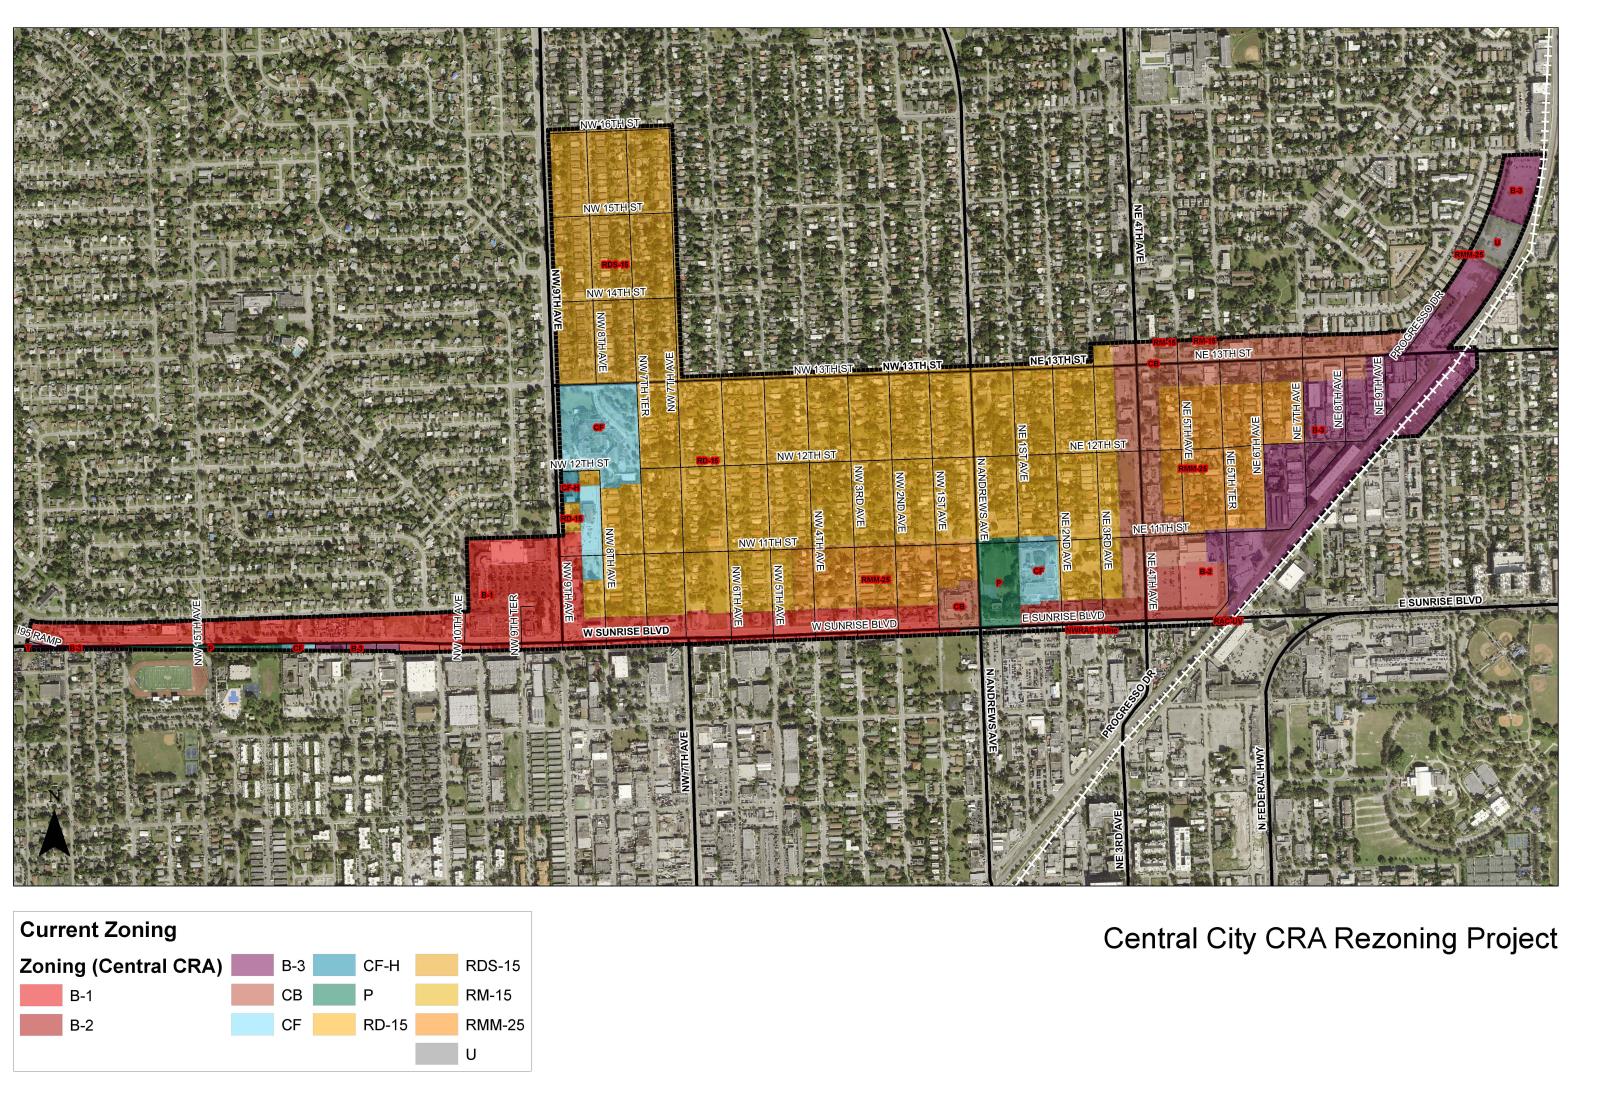 Central City CRA Rezoning Project